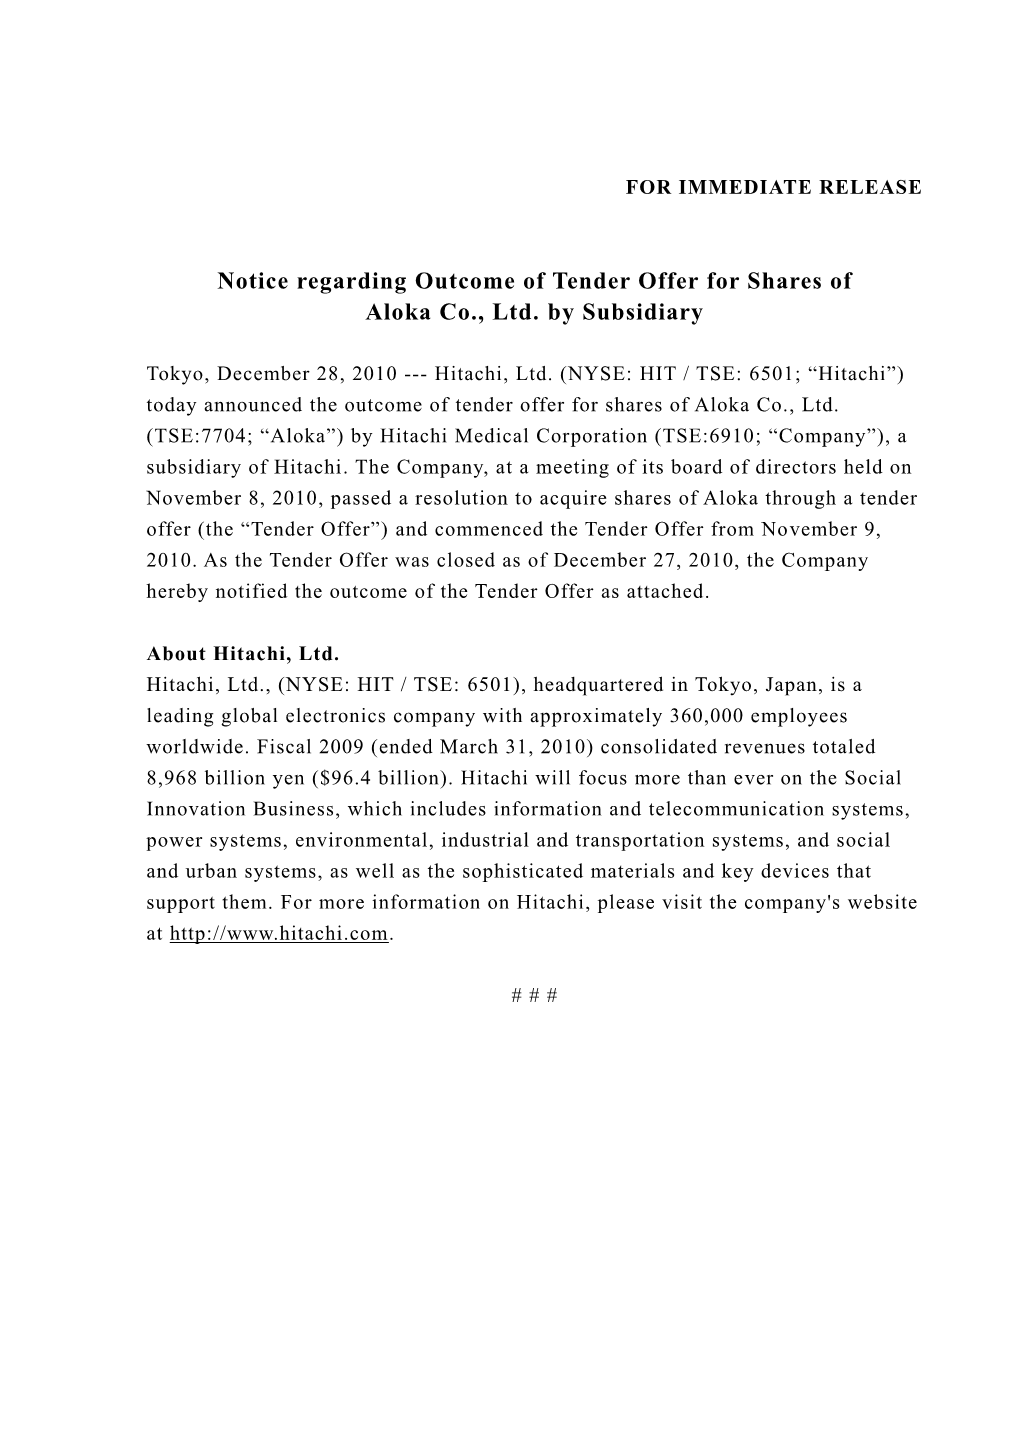 Notice Regarding Outcome of Tender Offer for Shares of Aloka Co., Ltd. by Subsidiary